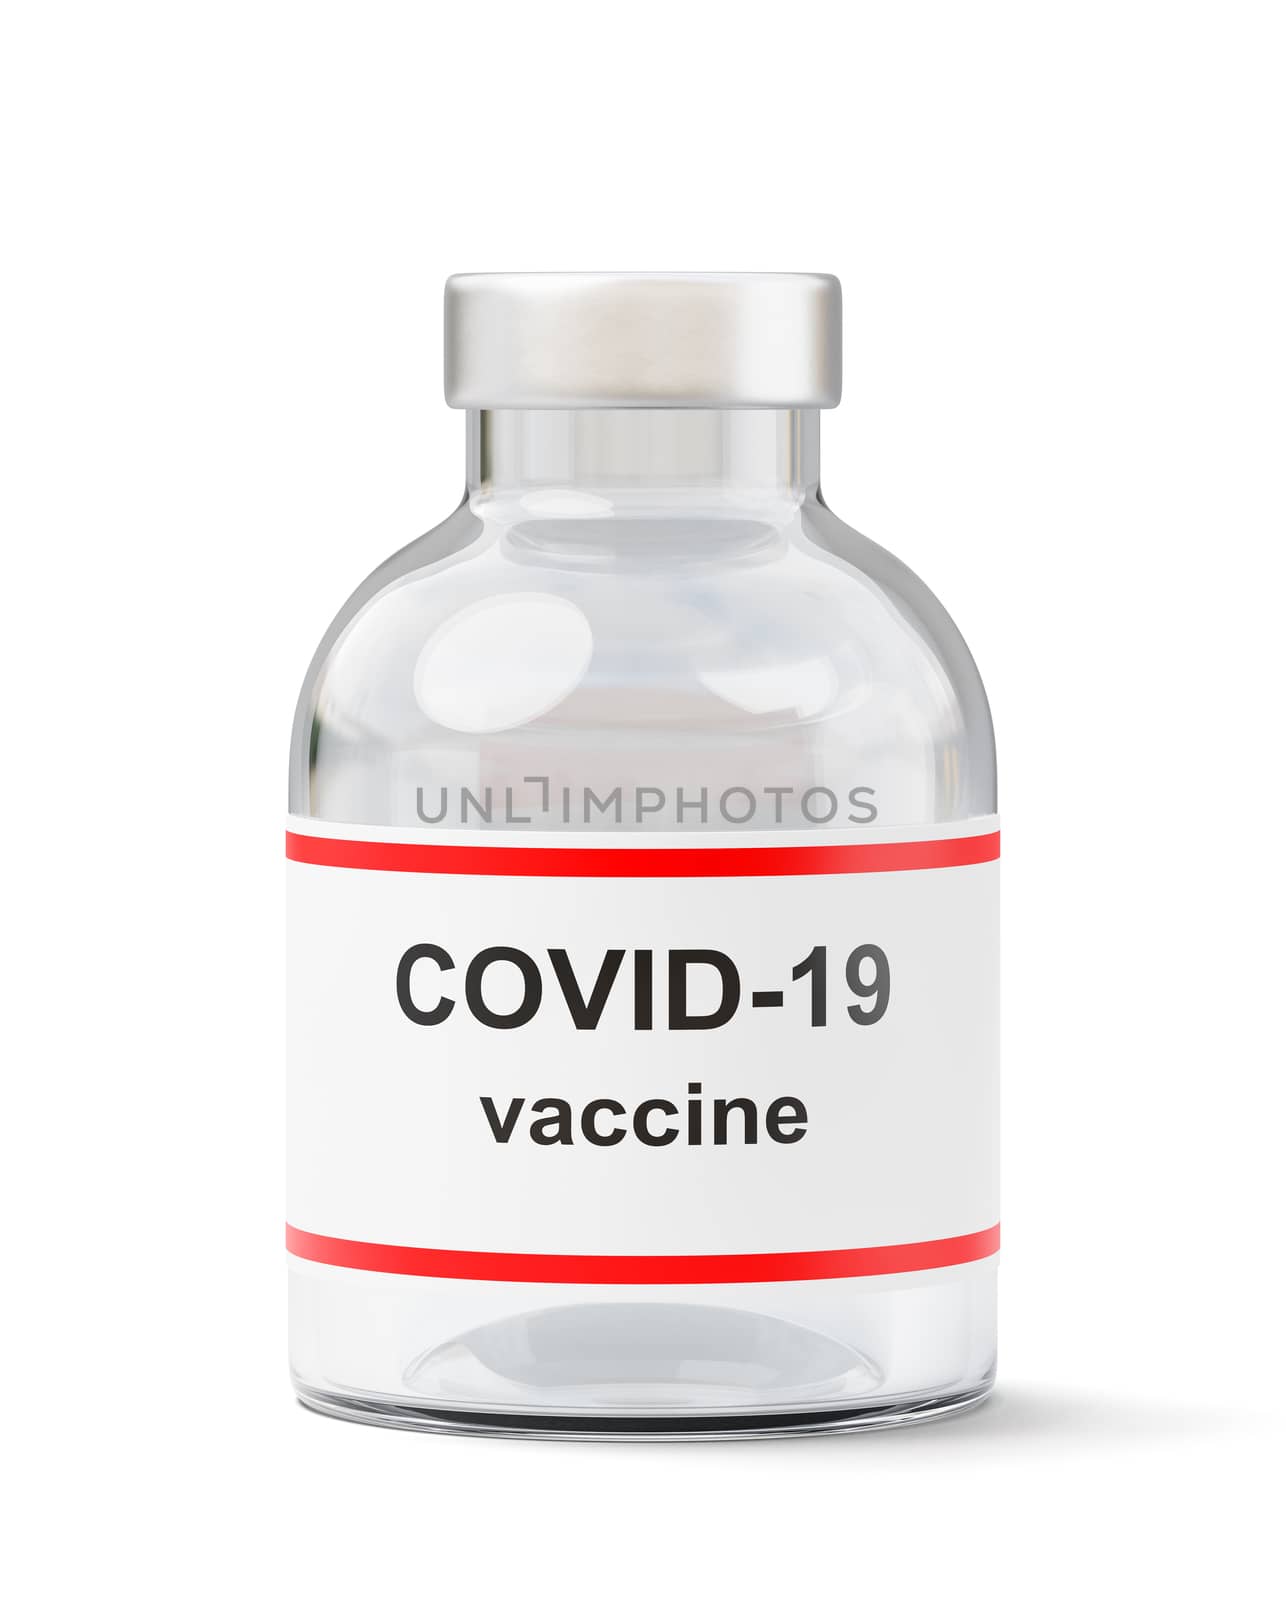 Covid 19 Vaccine Bottle Isolated on White Background 3D Illustration